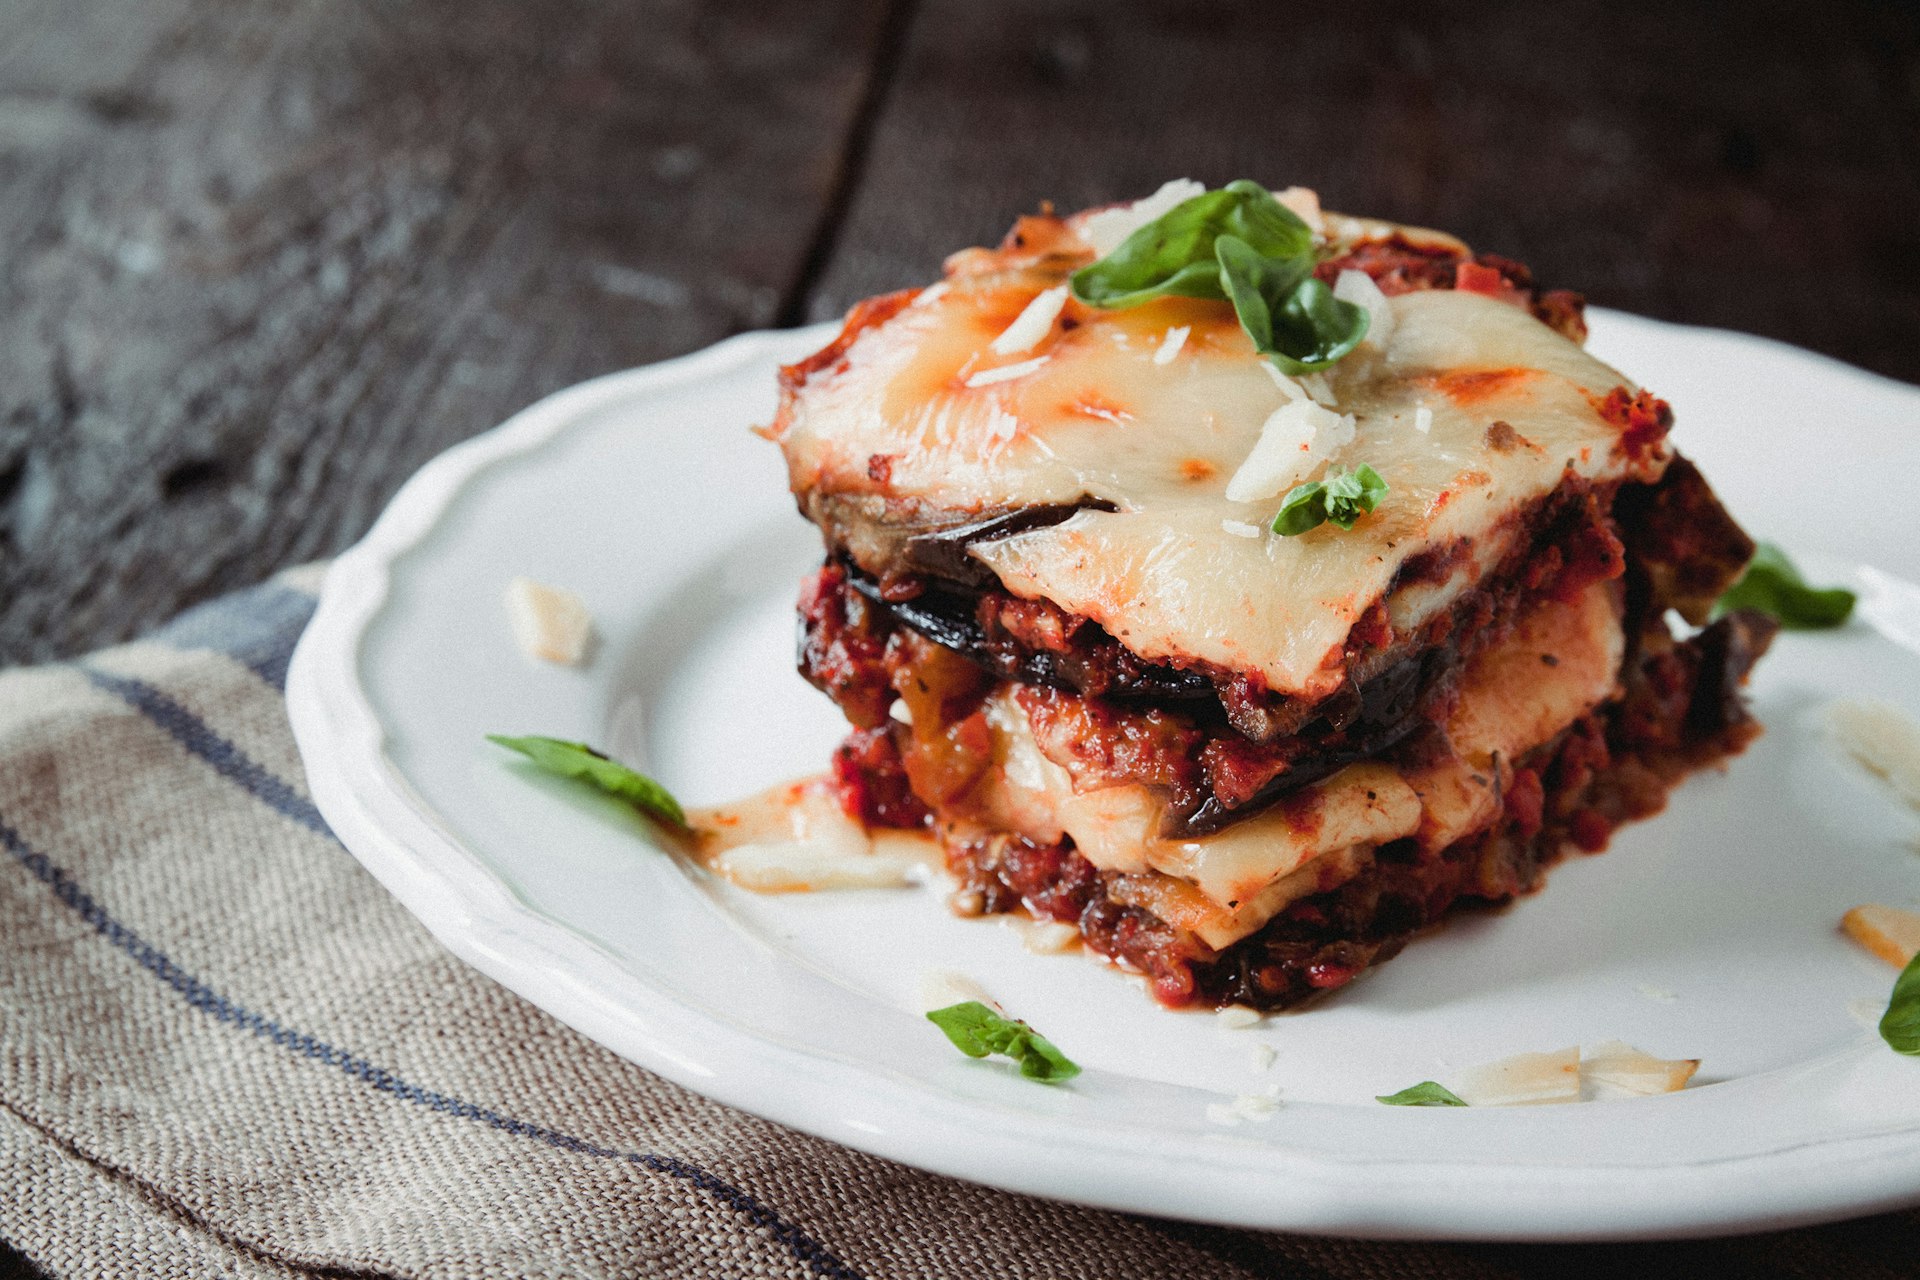 traditional Parmigiana di melanzane: baked eggplant - italy, Sicily cuisine.Baked eggplant with cheese, tomatoes and spices on a white plate. A dish of eggplant is on a wooden table